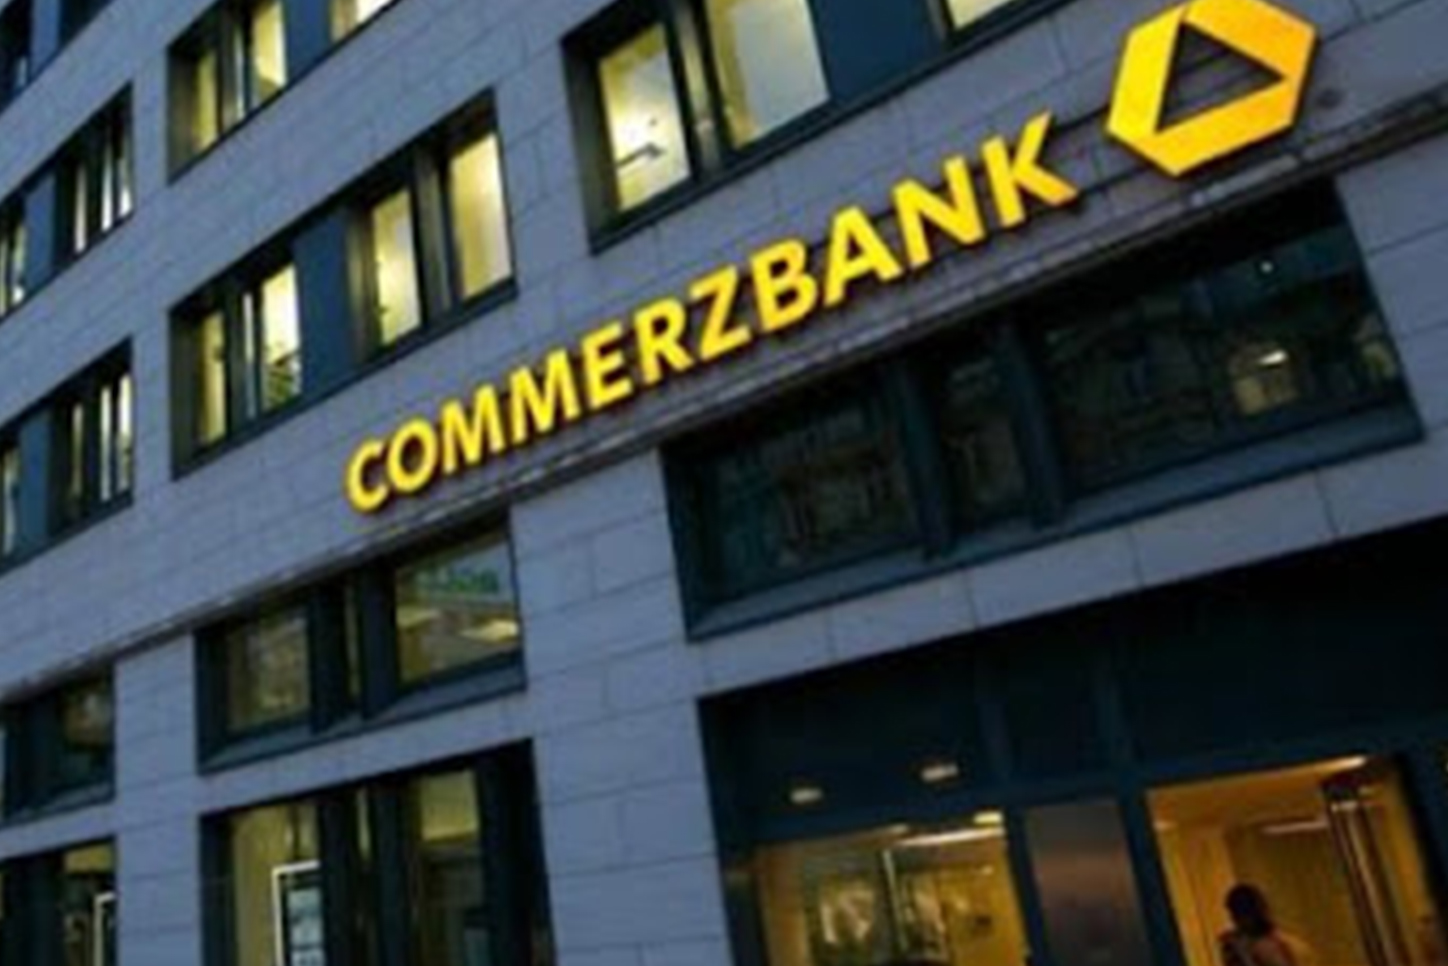 financialounge -  BTP Commerzbank daily news moody's rating